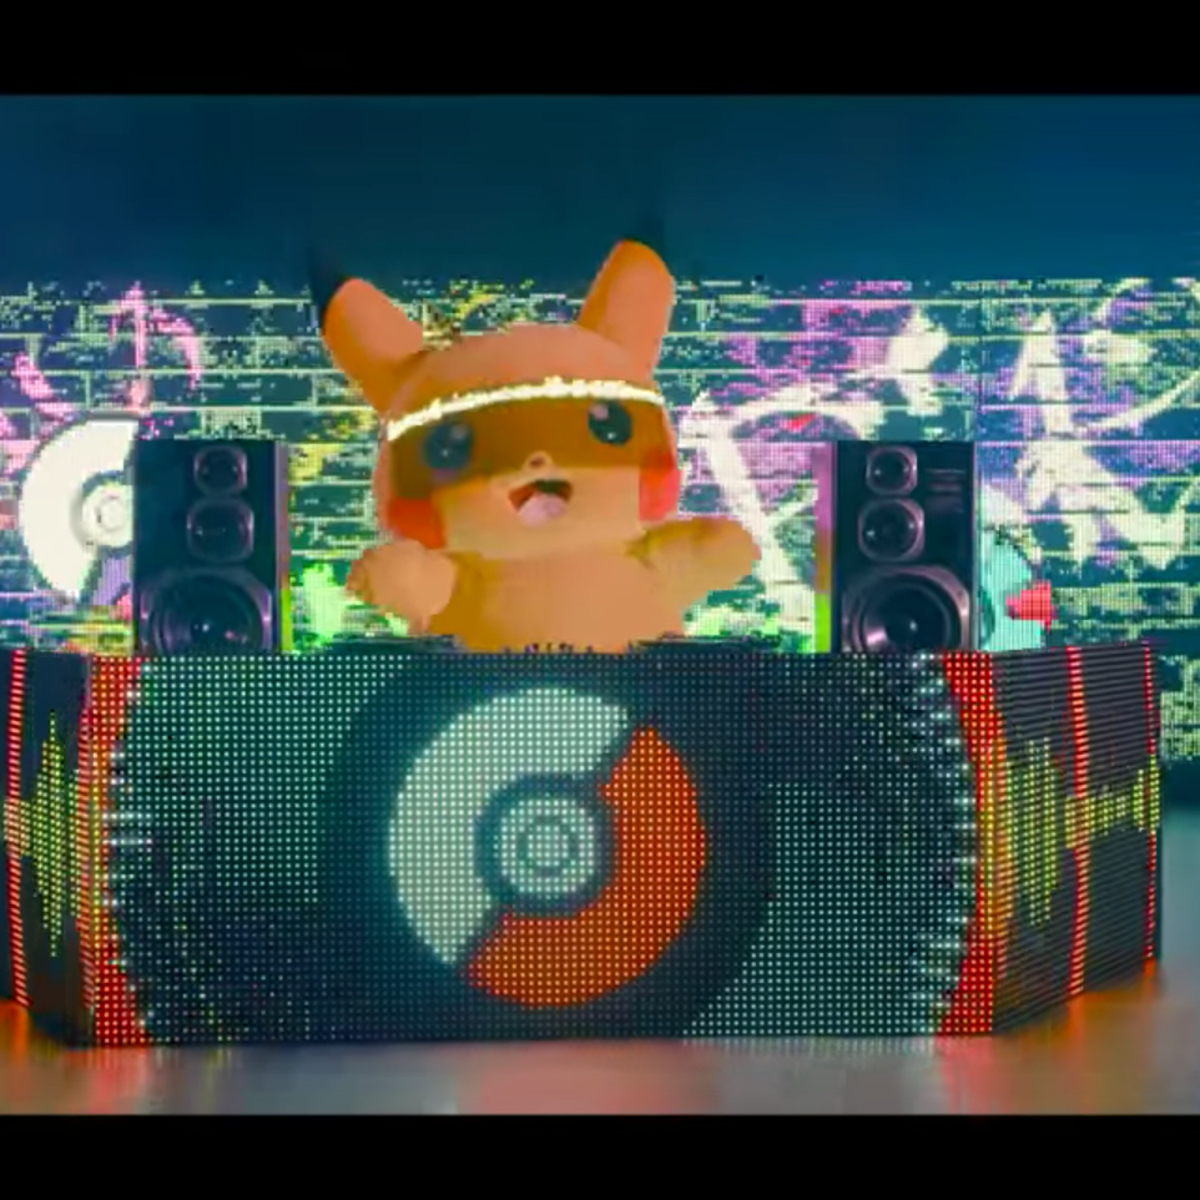 The Official Pokemon Youtube Uploaded A Dj Set From Pikachu With Remixes Of The Game S Music Edm Com The Latest Electronic Dance Music News Reviews Artists - original pokemon theme song roblox id number